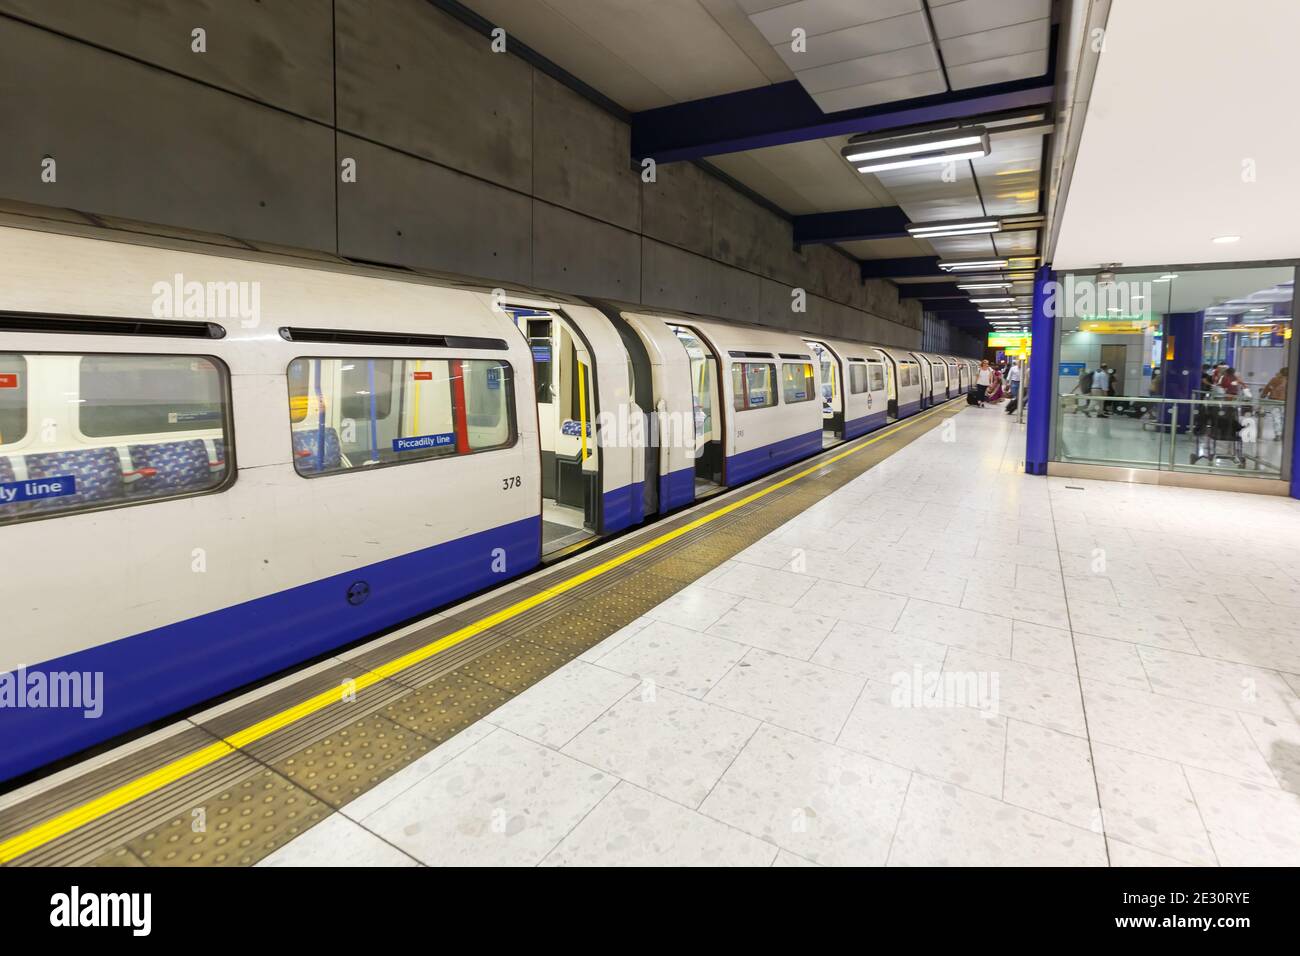 London, United Kingdom - July 9, 2019: Underground Station Terminal 5 at London Heathrow Airport (LHR) in the United Kingdom. Stock Photo